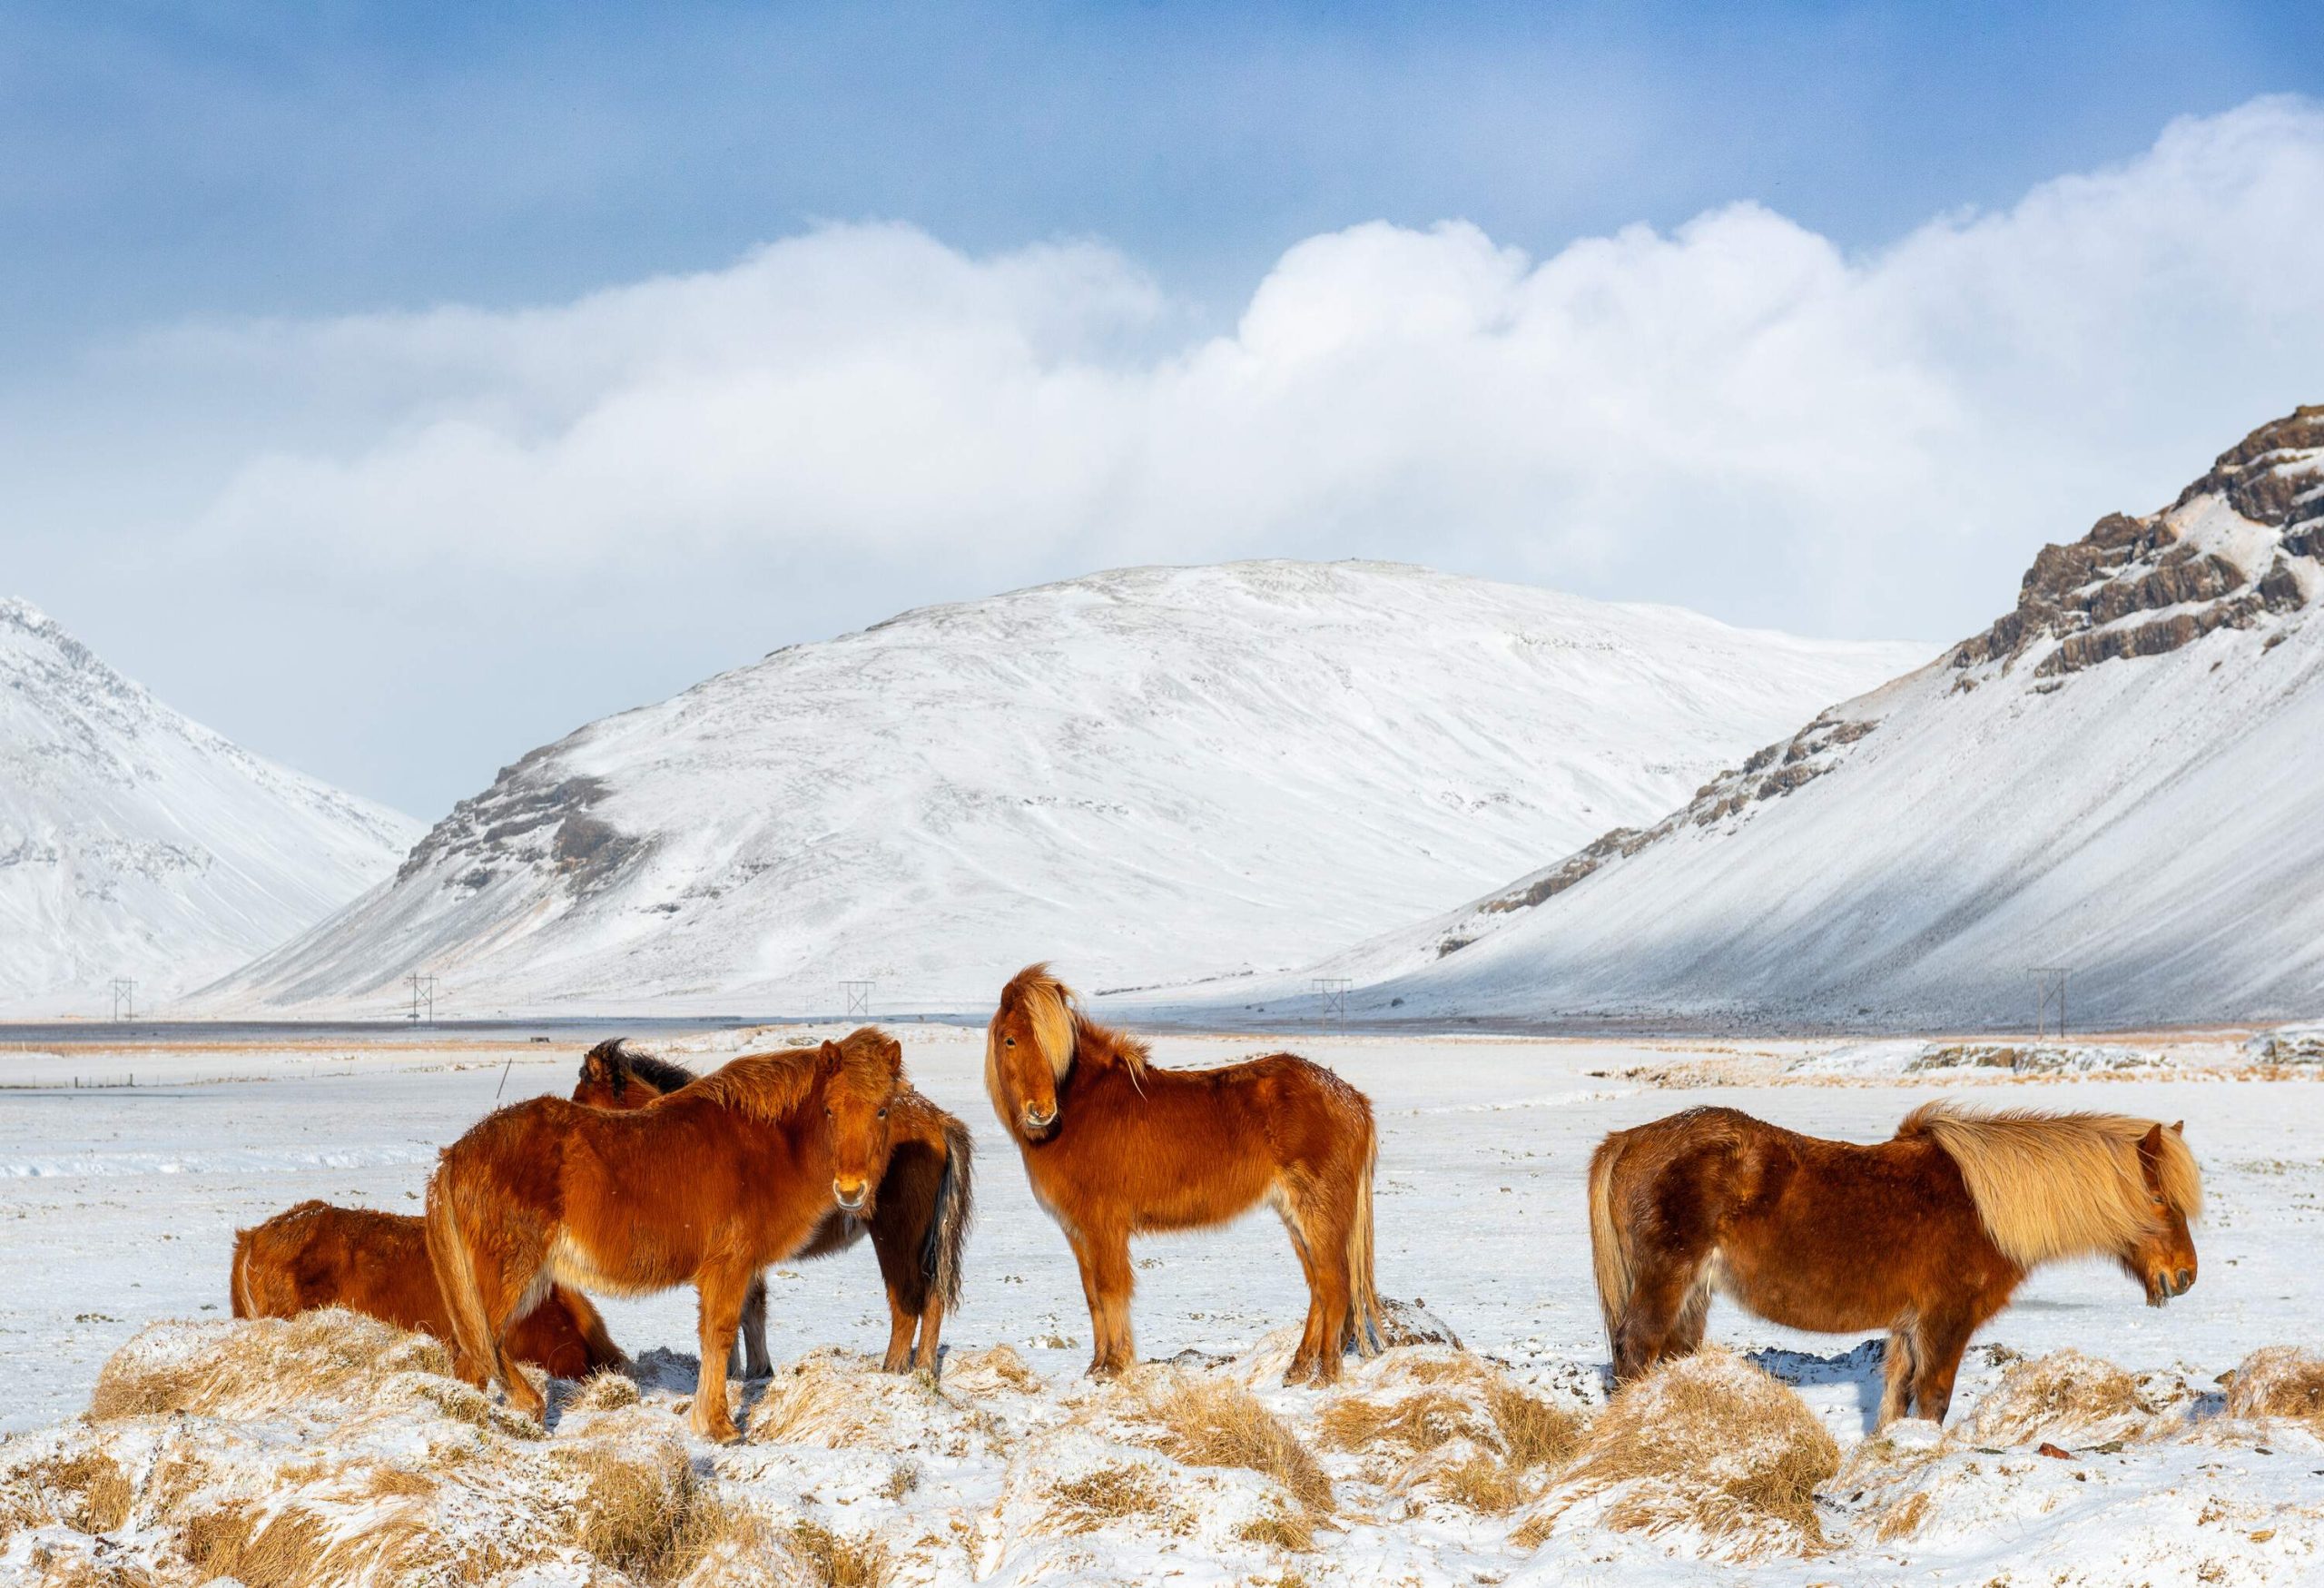 A herd of brown Icelandic horses standing on a snowfield against a backdrop of snow-capped mountains.